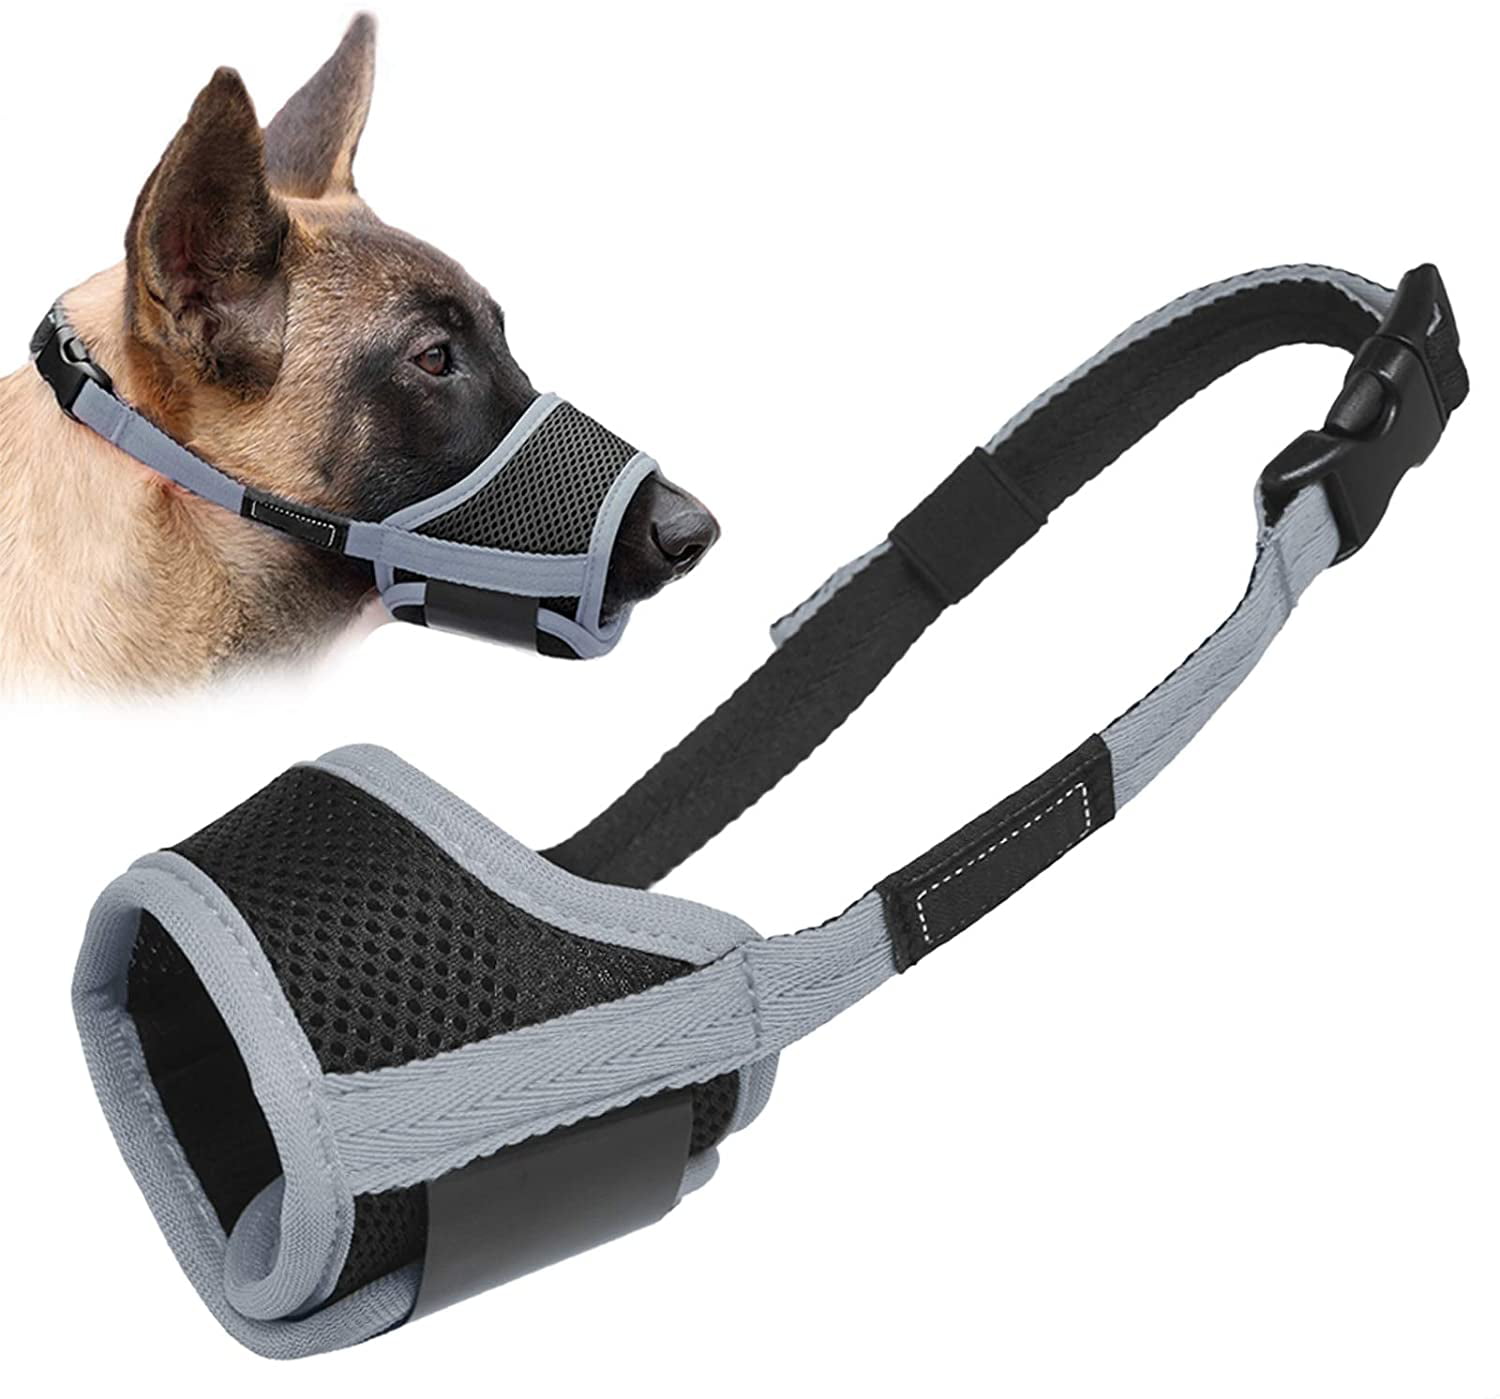 Anti Biting and Chewing Soft Dog Muzzle Cover with Dogs Hook & Loop for Small,Medium and Large Dogs Breathable Adjustable 